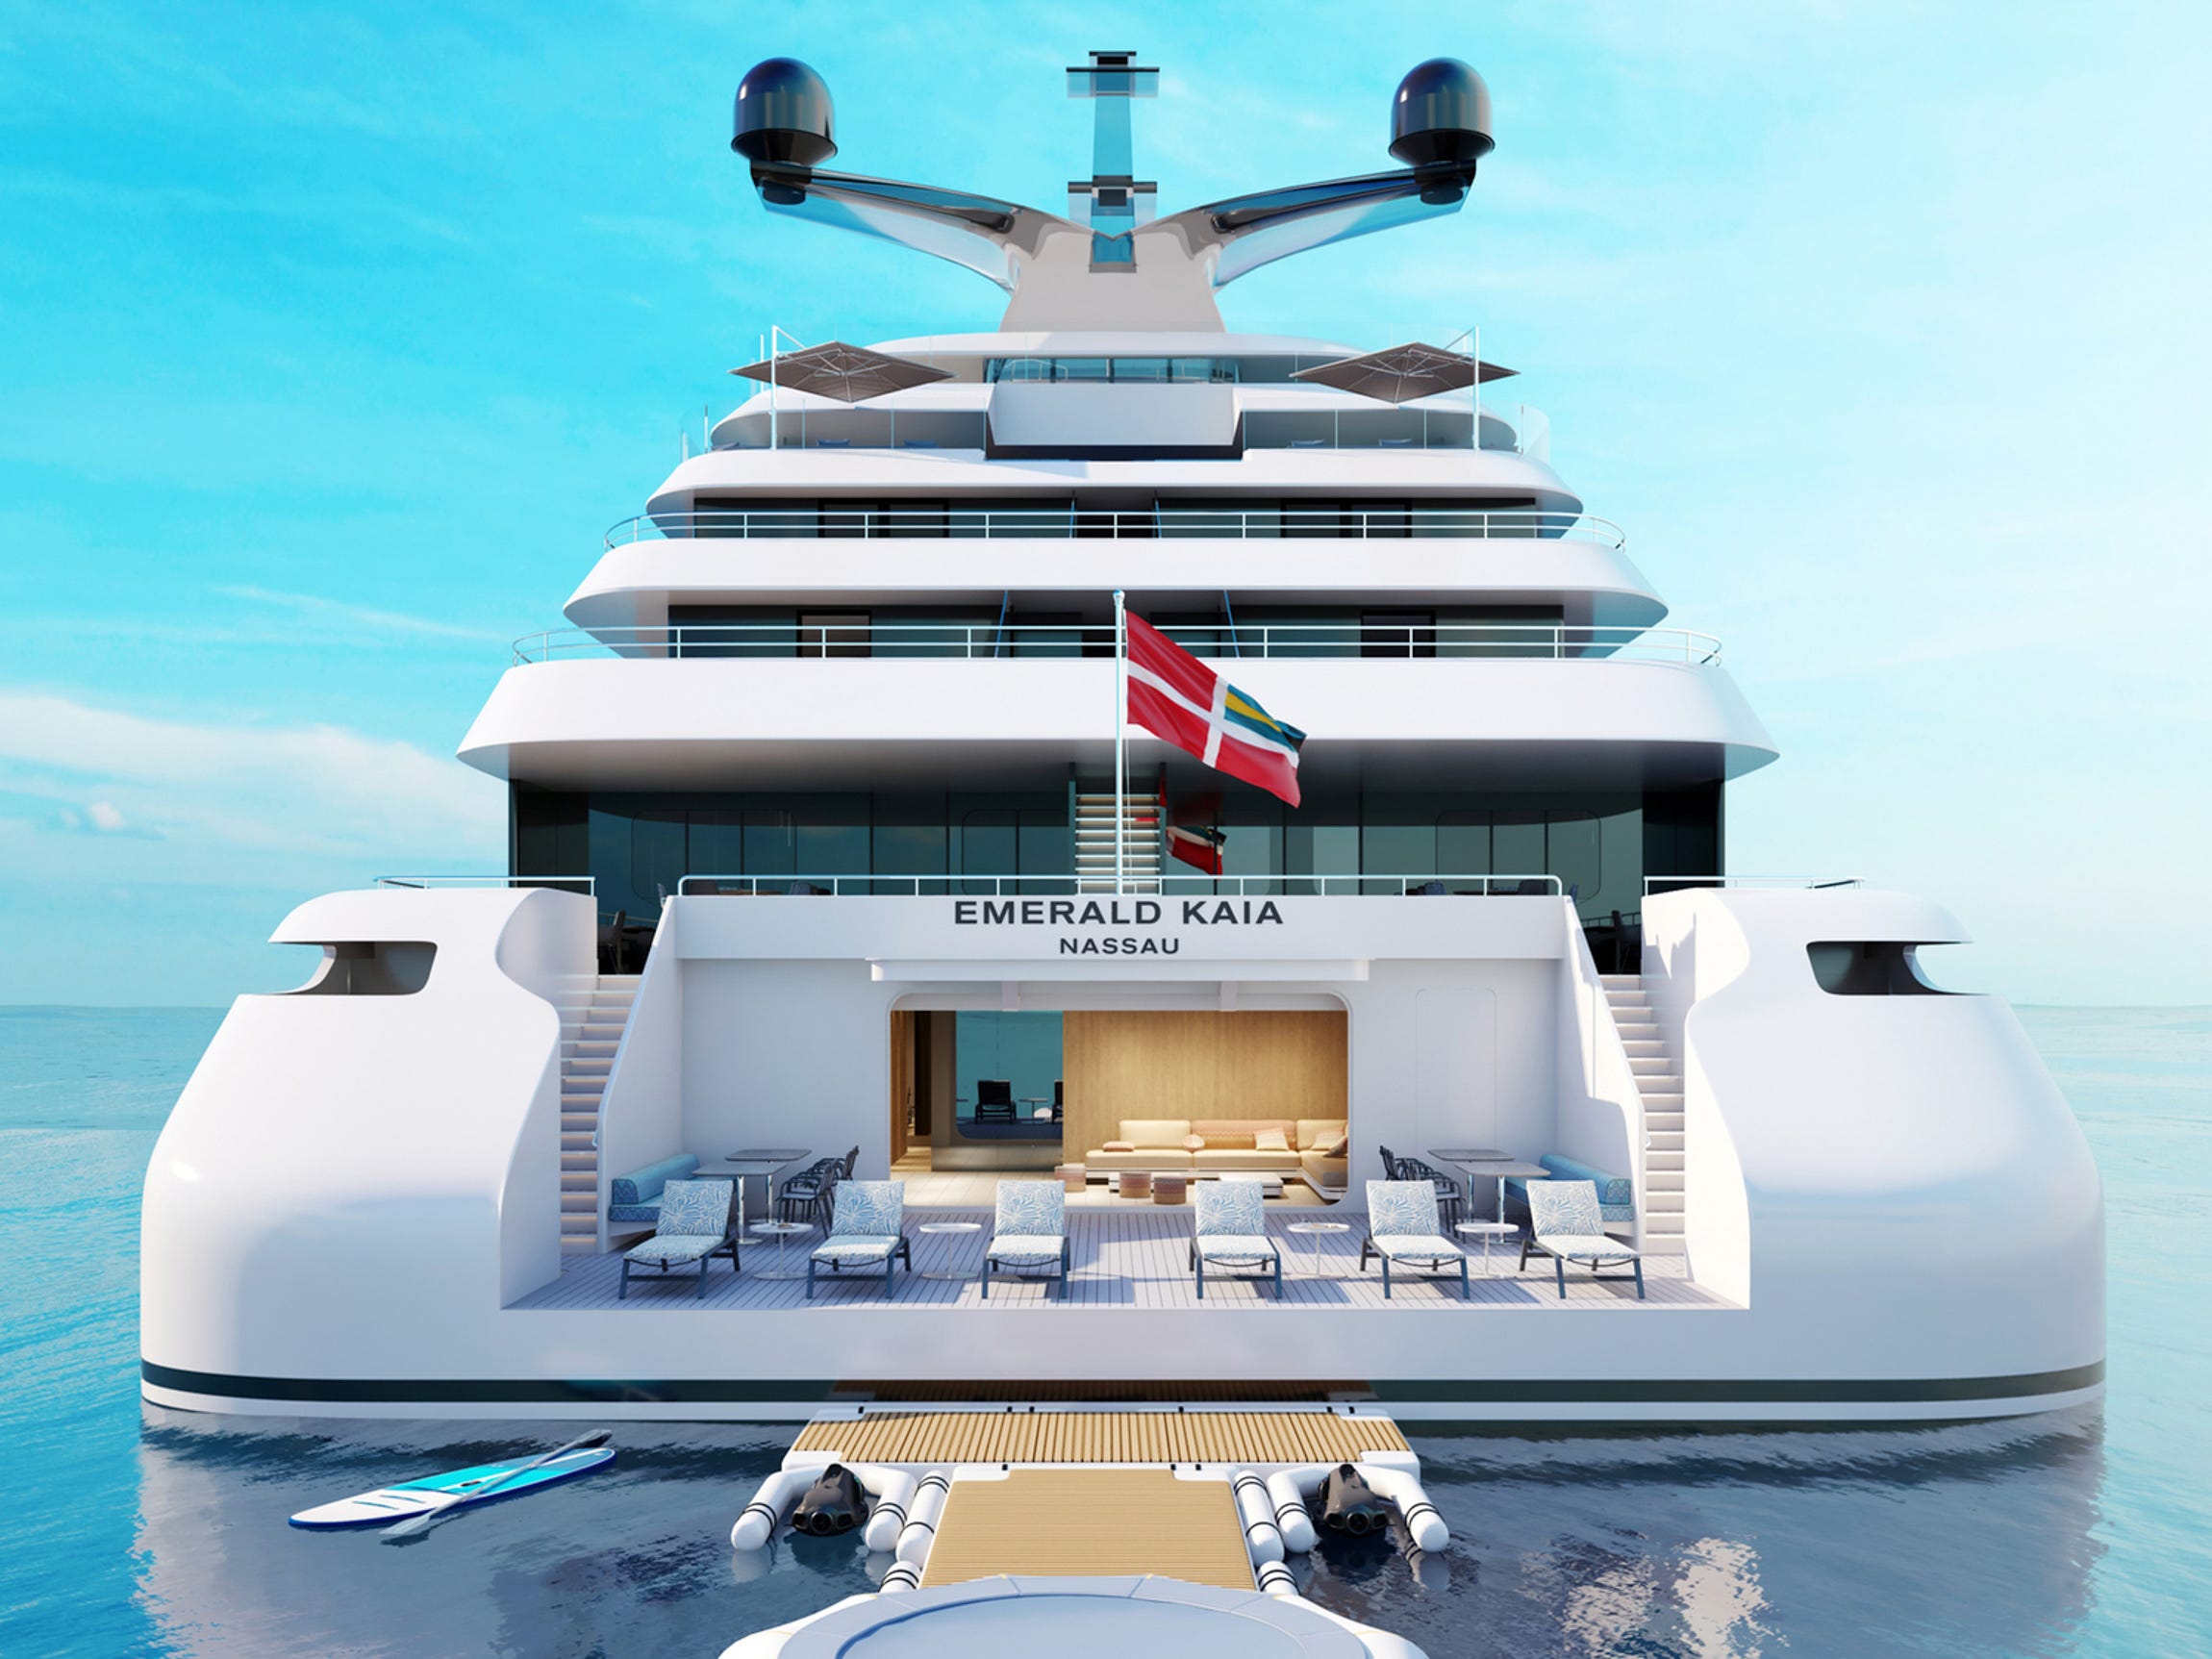 <ul class="summary-list"><li><a href="https://www.businessinsider.com/review-ultra-luxury-cruise-wealthy-travelers-regent-seven-seas-2023-12">Ultra-luxury cruise line</a> Emerald Cruises says its third ocean ship will debut in 2026.</li><li>The all-inclusive vessel, which Emerald calls a "yacht," would accommodate up to 128 people.</li><li>Emerald, known for river cruises, has been investing more in its ocean-based business.</li></ul><p>Over the last few years, the mass-market cruise industry's larger-than-life <a href="https://www.businessinsider.com/royal-caribbean-wonder-icon-of-the-seas-not-for-everyone-2024-4">mega-ships</a> — outfitted with loud waterparks and more dining options than you could eat in a week — have dominated the spotlight.</p><p>But in the <a href="https://www.businessinsider.com/ultra-luxury-cruise-stateroom-not-favorite-regent-seven-seas-review-2023-12">ultra-luxury cruise</a> market, it's been the opposite. The smaller and more exclusive the vessel, the better. So much so that Emerald Cruises' next ocean-based ship, launching in 2026, plans to accommodate no more than 128 travelers.</p><p>It's a far cry from <a href="https://www.businessinsider.com/royal-caribbean-wonder-vs-icon-of-the-seas-balcony-cabin-compared-2024-4">Royal Caribbean's new 7,600-guest cruise liner</a>. And the price difference is just as steep: almost $250 per night on Royal Caribbean's Icon of the Seas versus <a href="https://www.emeraldcruises.com/tours/e01x-ecusa/e01x-ecusa-2026-sez-sez">more than</a> $720 per night on the upcoming ultra-luxury Emerald Kaia.</p><p>"When people think of cruising now, they automatically think of these <a href="https://www.businessinsider.com/best-amenities-royal-caribbean-icon-of-the-seas-cruise-ship-2024-4">large ships</a>," Robert Castro, the vice president of marketing for Scenic Group, Emerald's parent company, told Business Insider. "There's a market for that, but we're in a unique position."</p><div class="read-original">Read the original article on <a href="https://www.businessinsider.com/emerald-ultra-luxury-cruise-line-new-yacht-wealthy-travelers-2024-4">Business Insider</a></div>